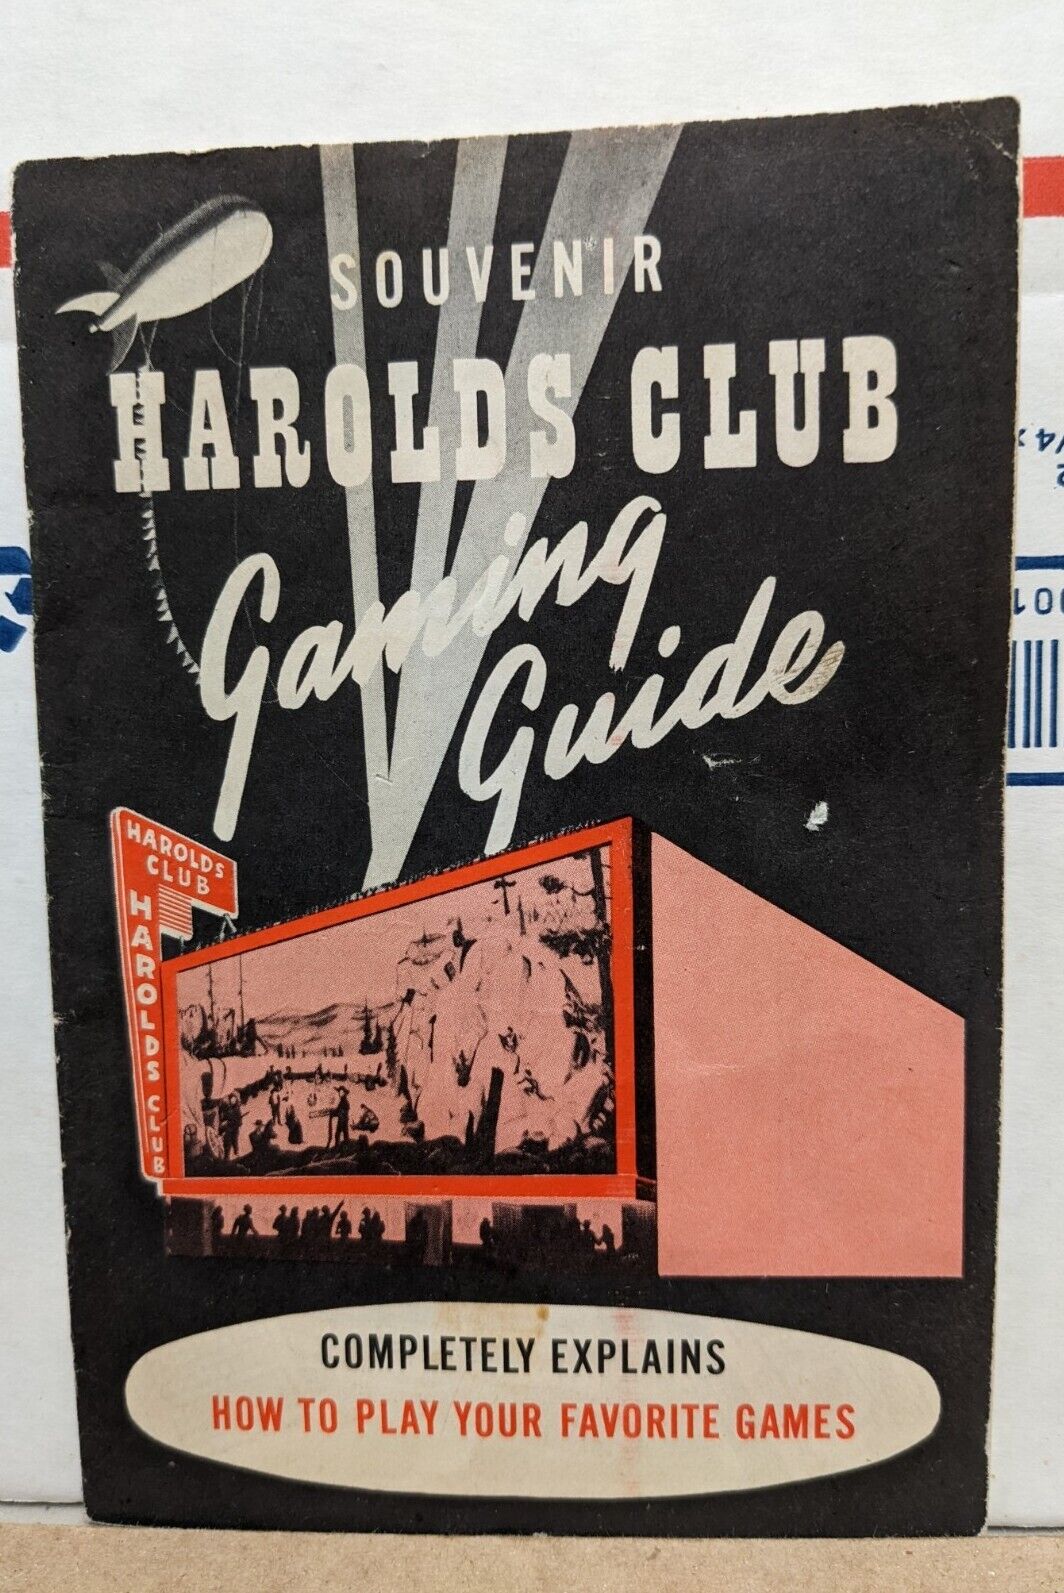 1949 Souvenir Harolds Club Gaming Guide How To Play Your Favorite Games Reno NV